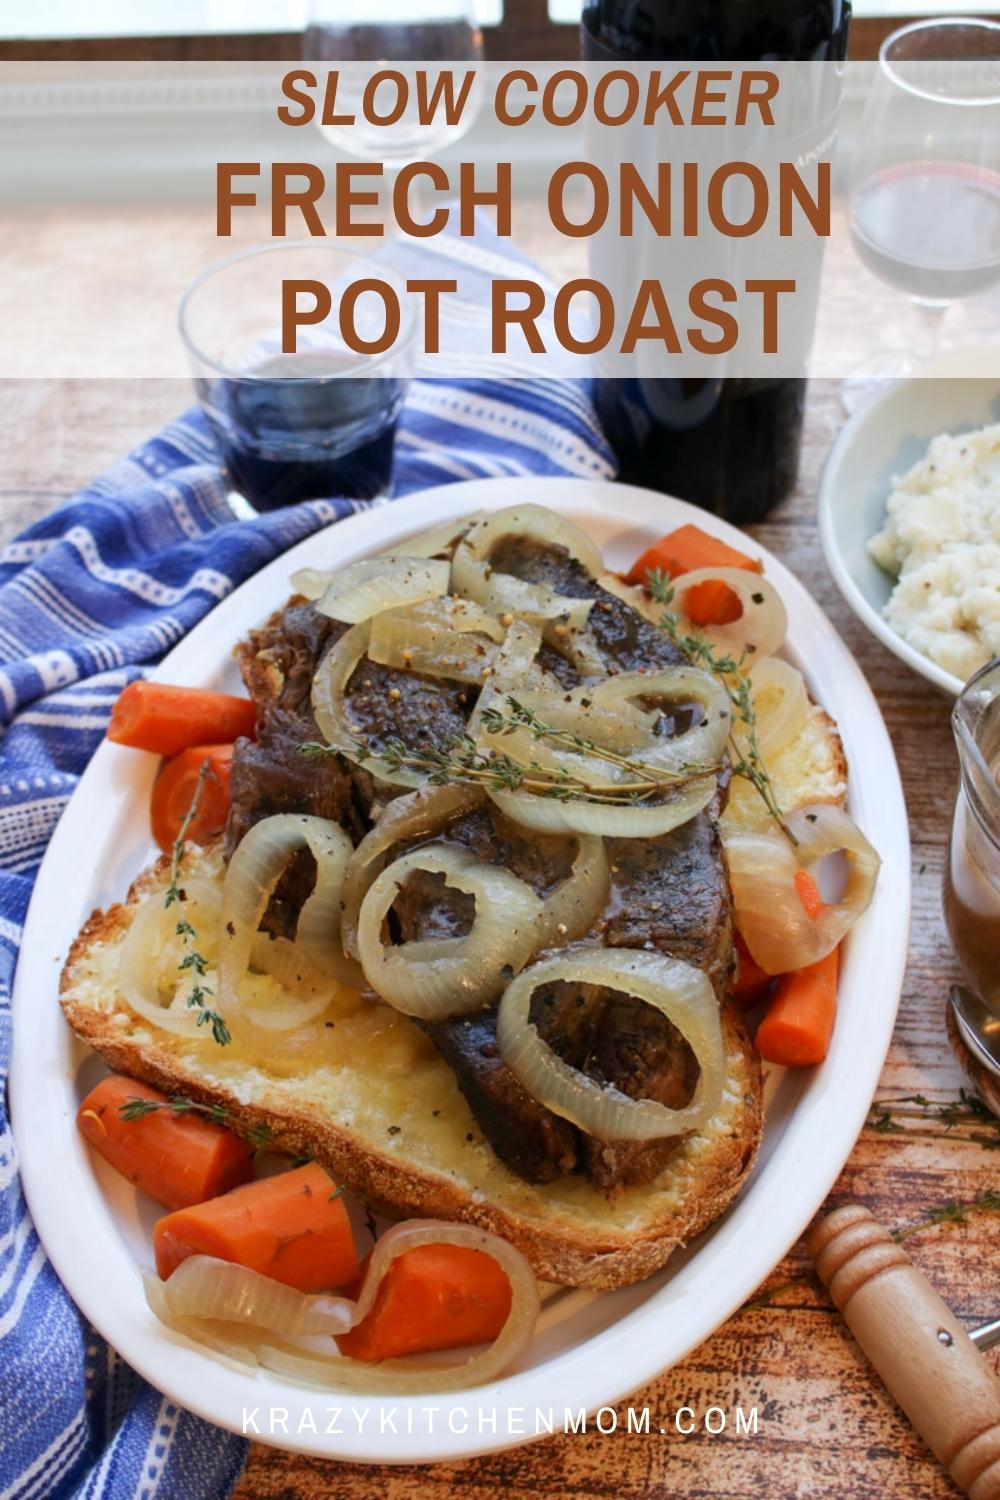 This pot roast has all of our favorite french onion soup flavors in a hearty ware Sunday dinner. Comfort food at its finest.  via @krazykitchenmom